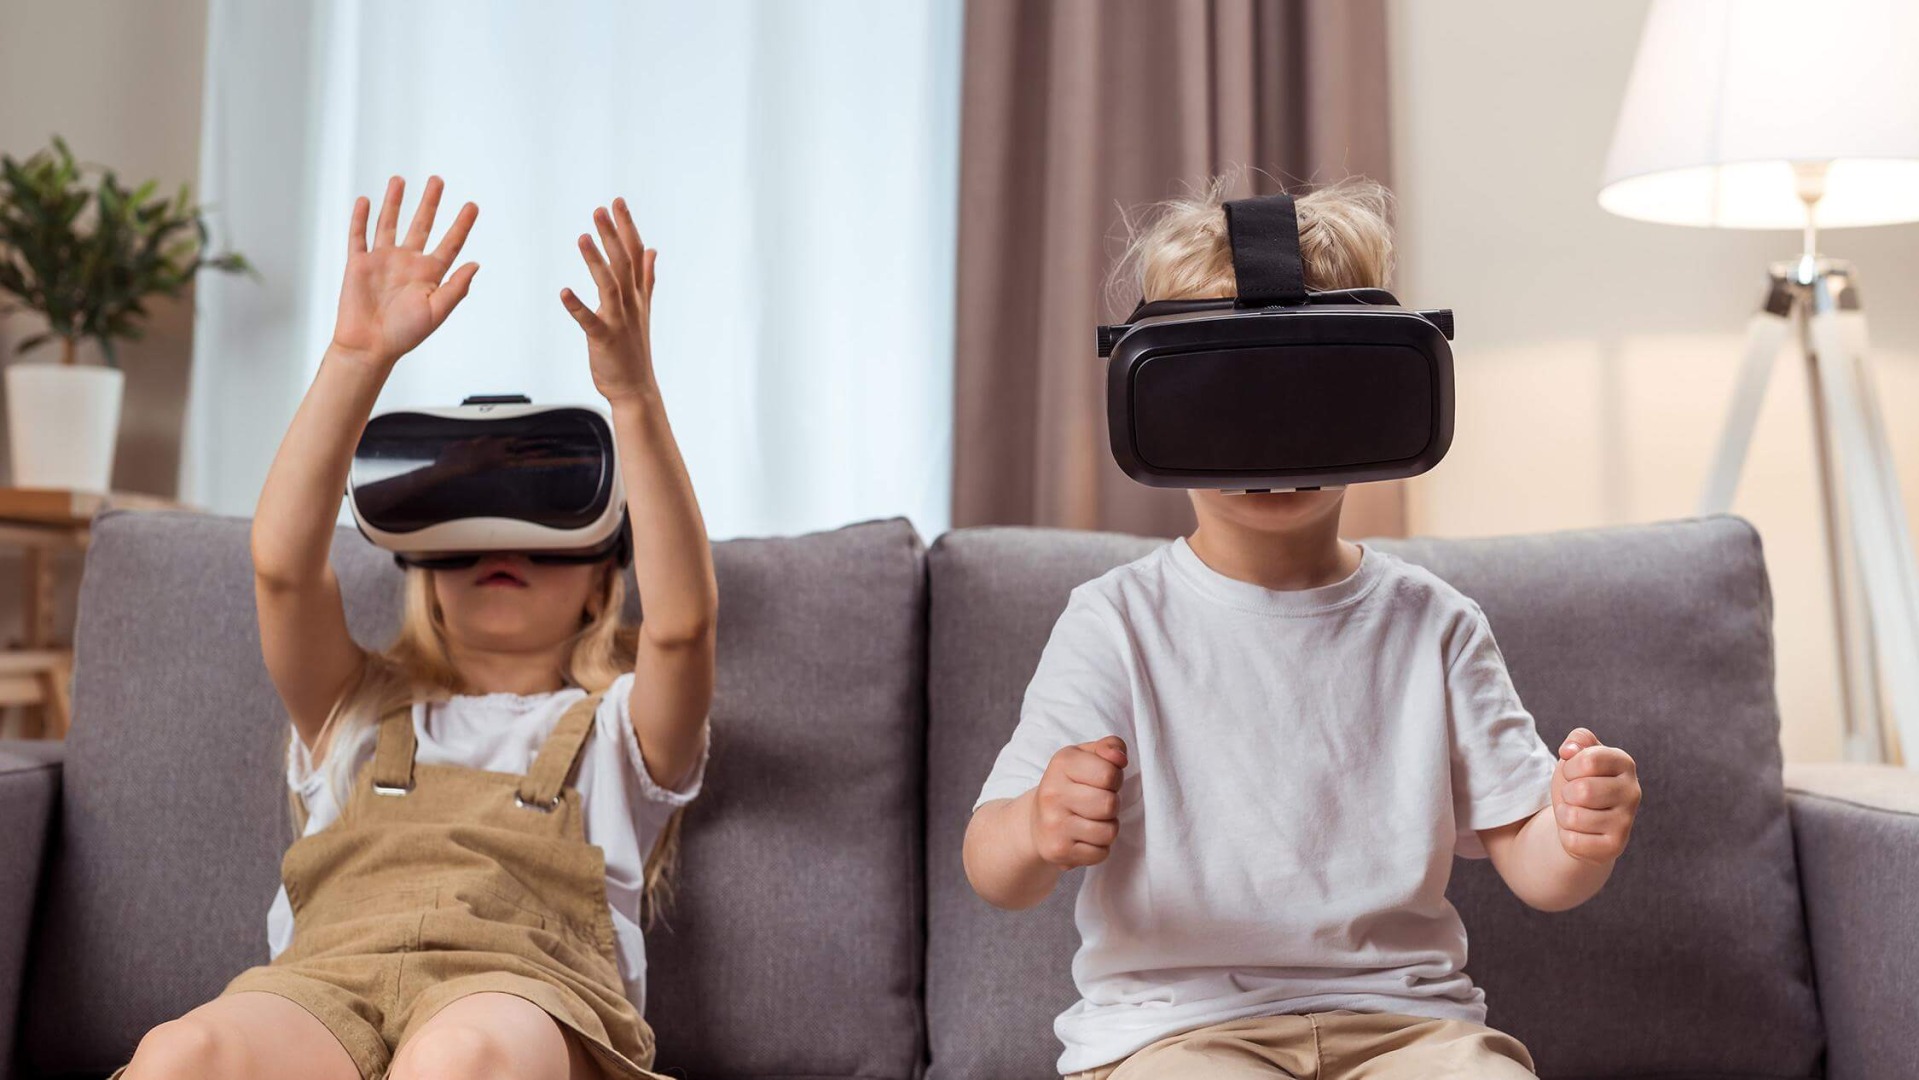 How Virtual Reality Is Inculcating New Social Skills